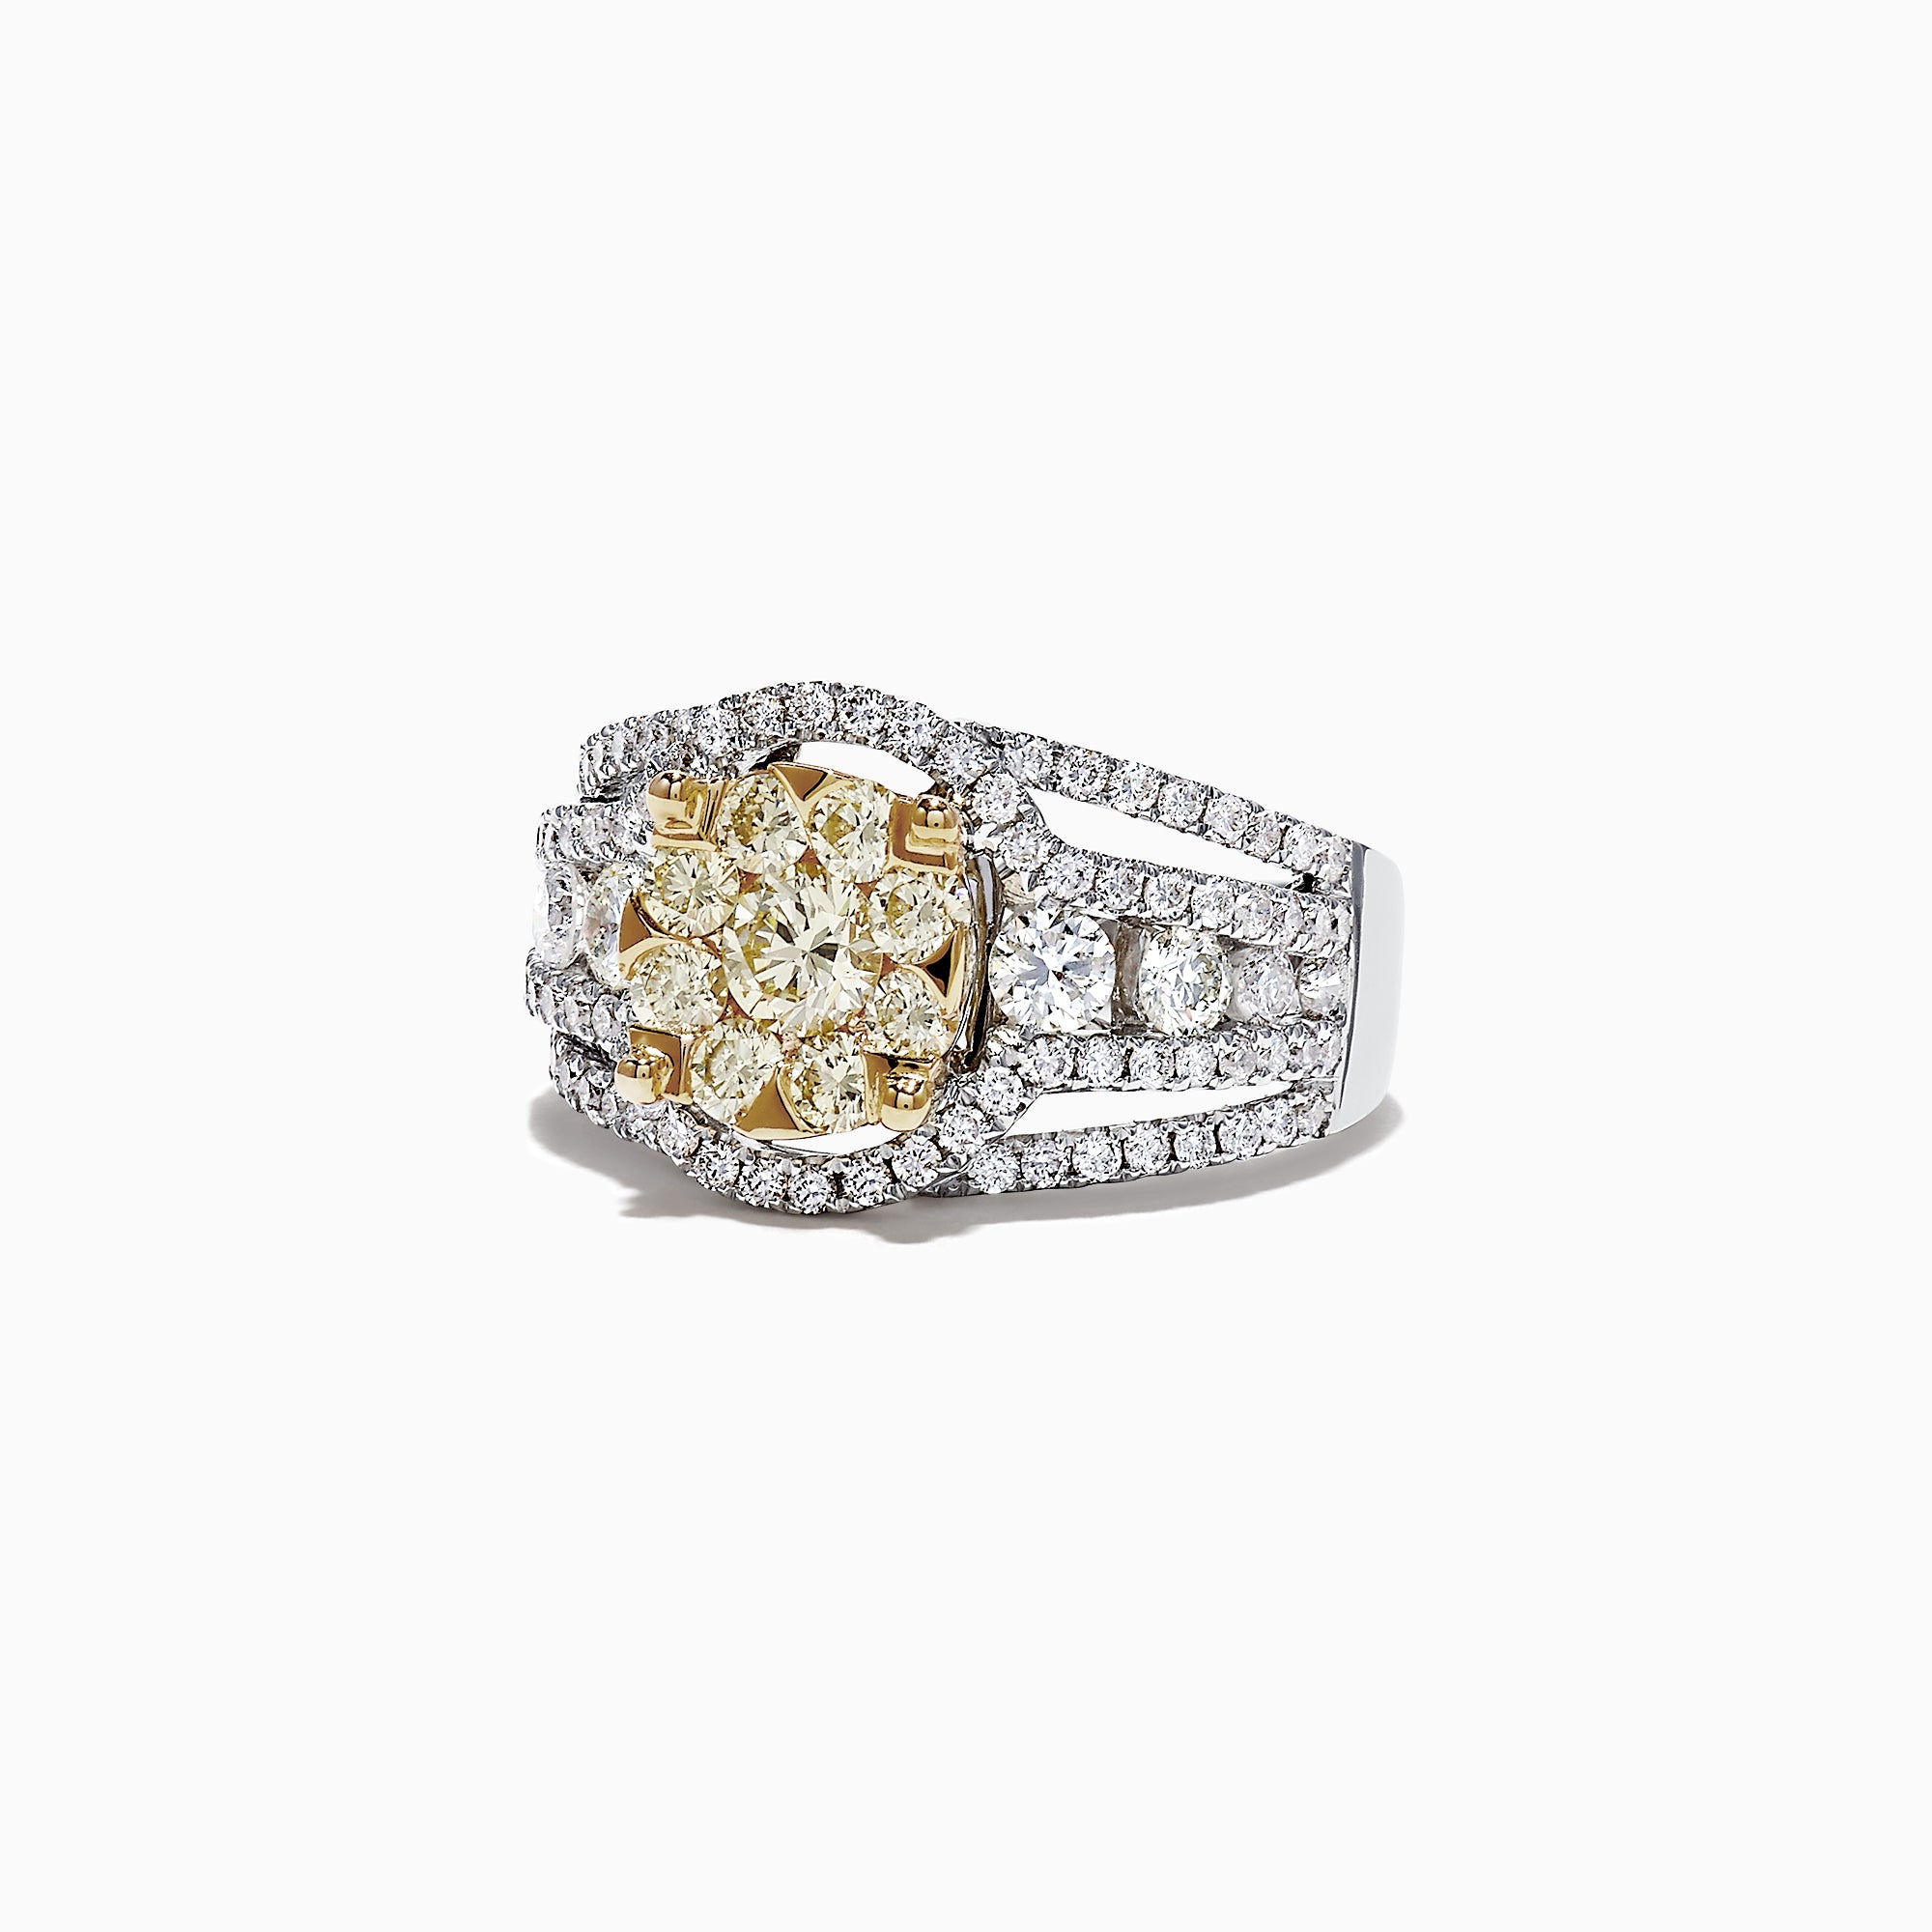 Canare 14K Two-Tone Gold Yellow and White Diamond Ring, 2.16 TCW